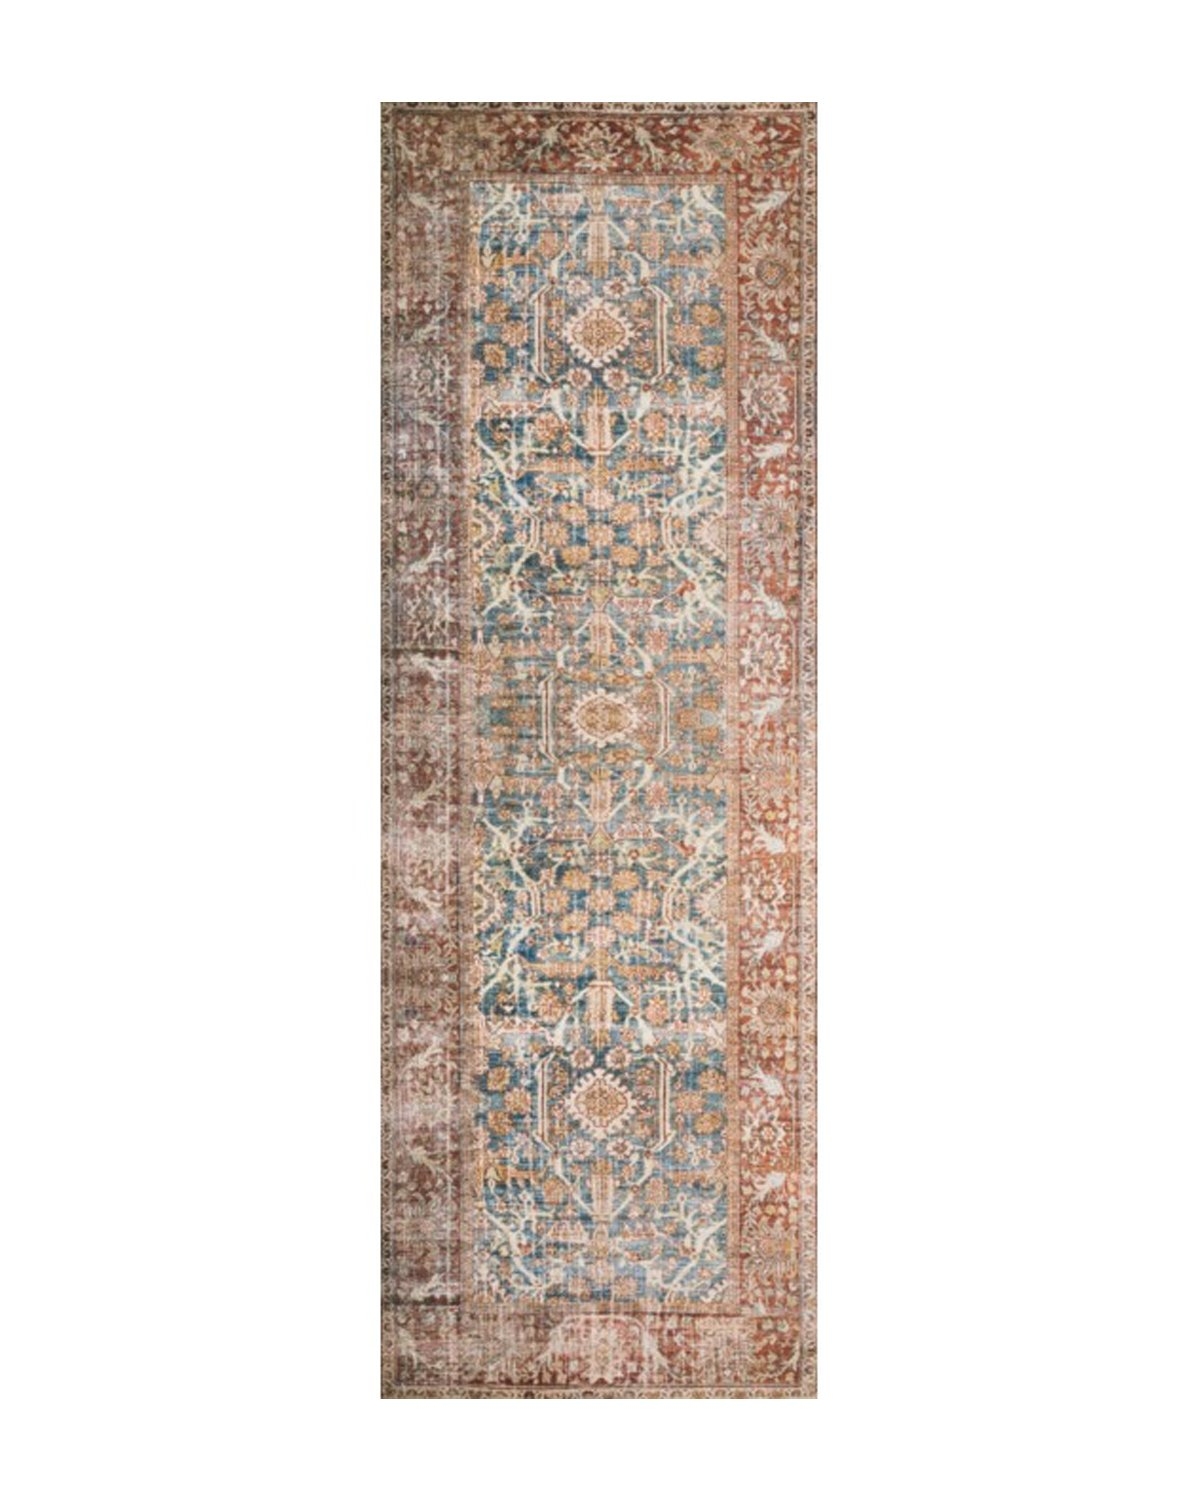 TUNIS PATTERNED RUG, 2'6" x 7'6" - Image 0